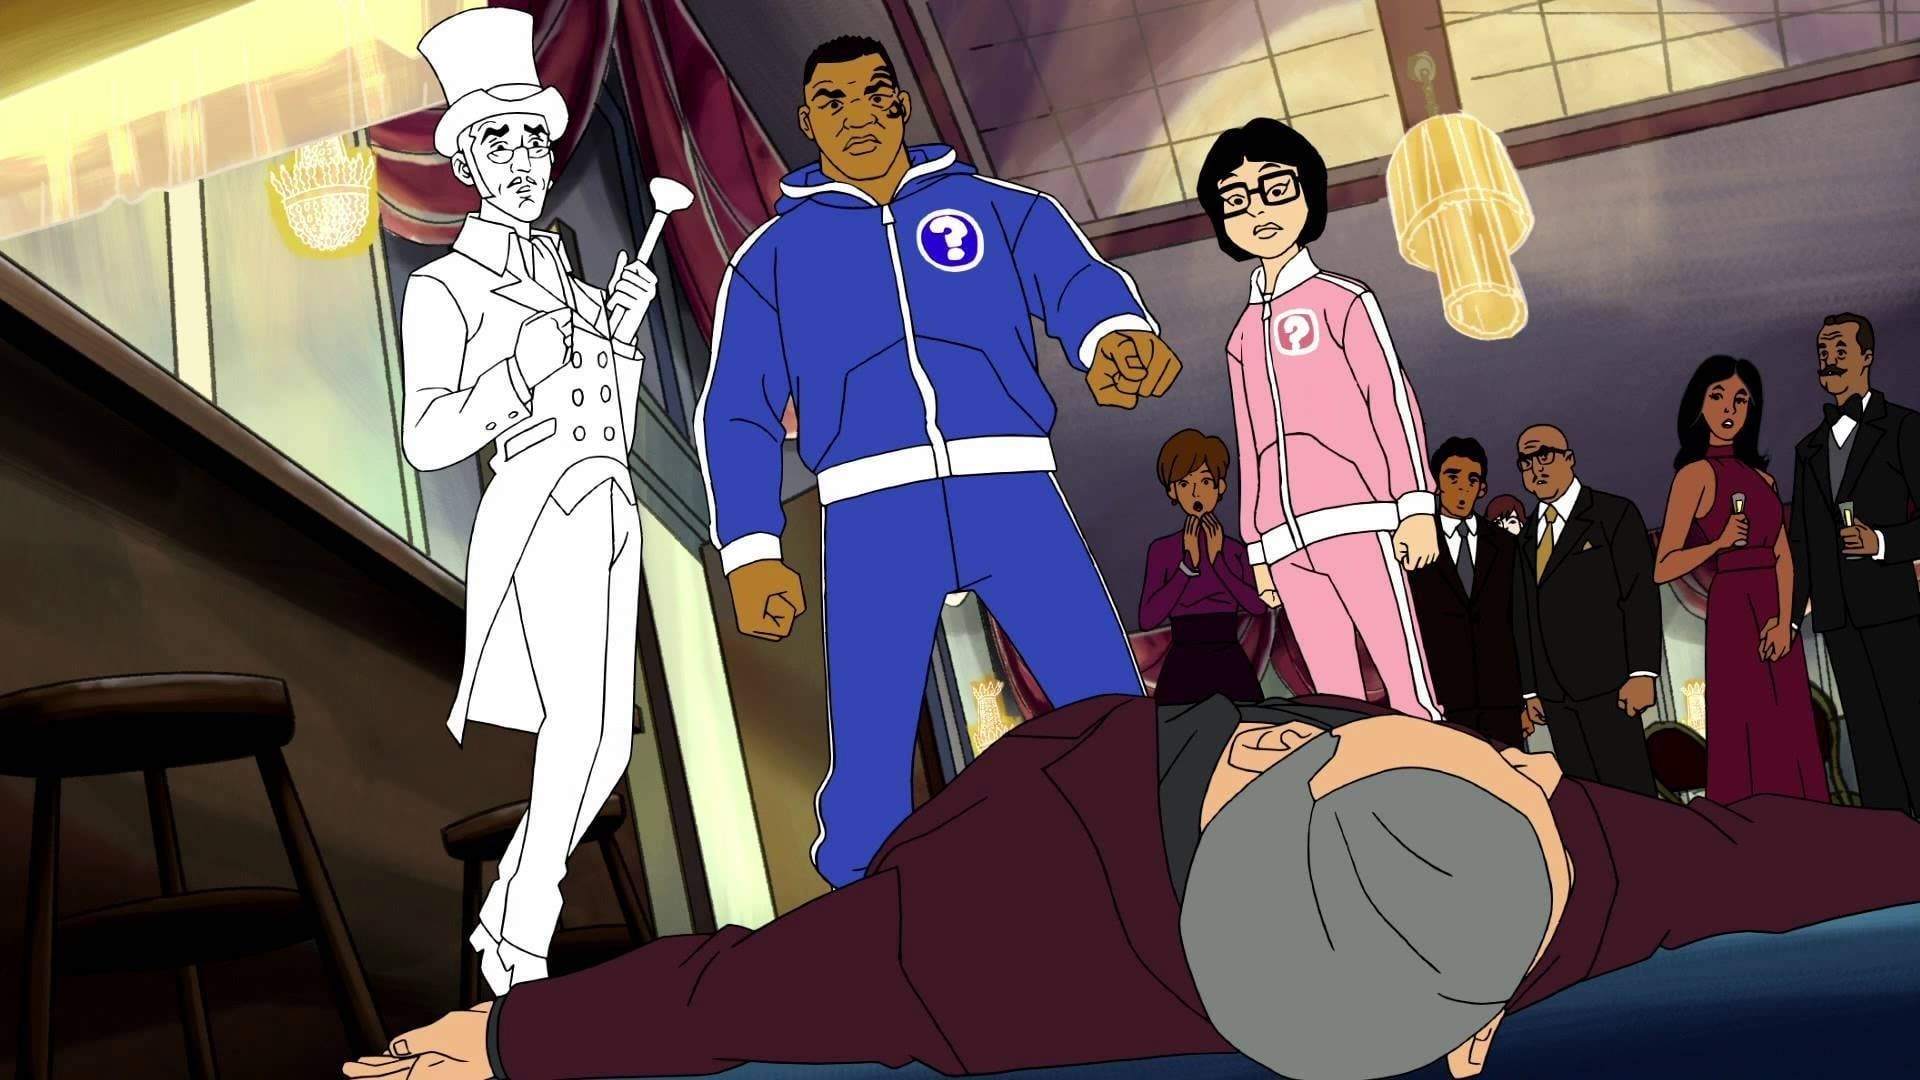 Mike Tyson Mysteries background